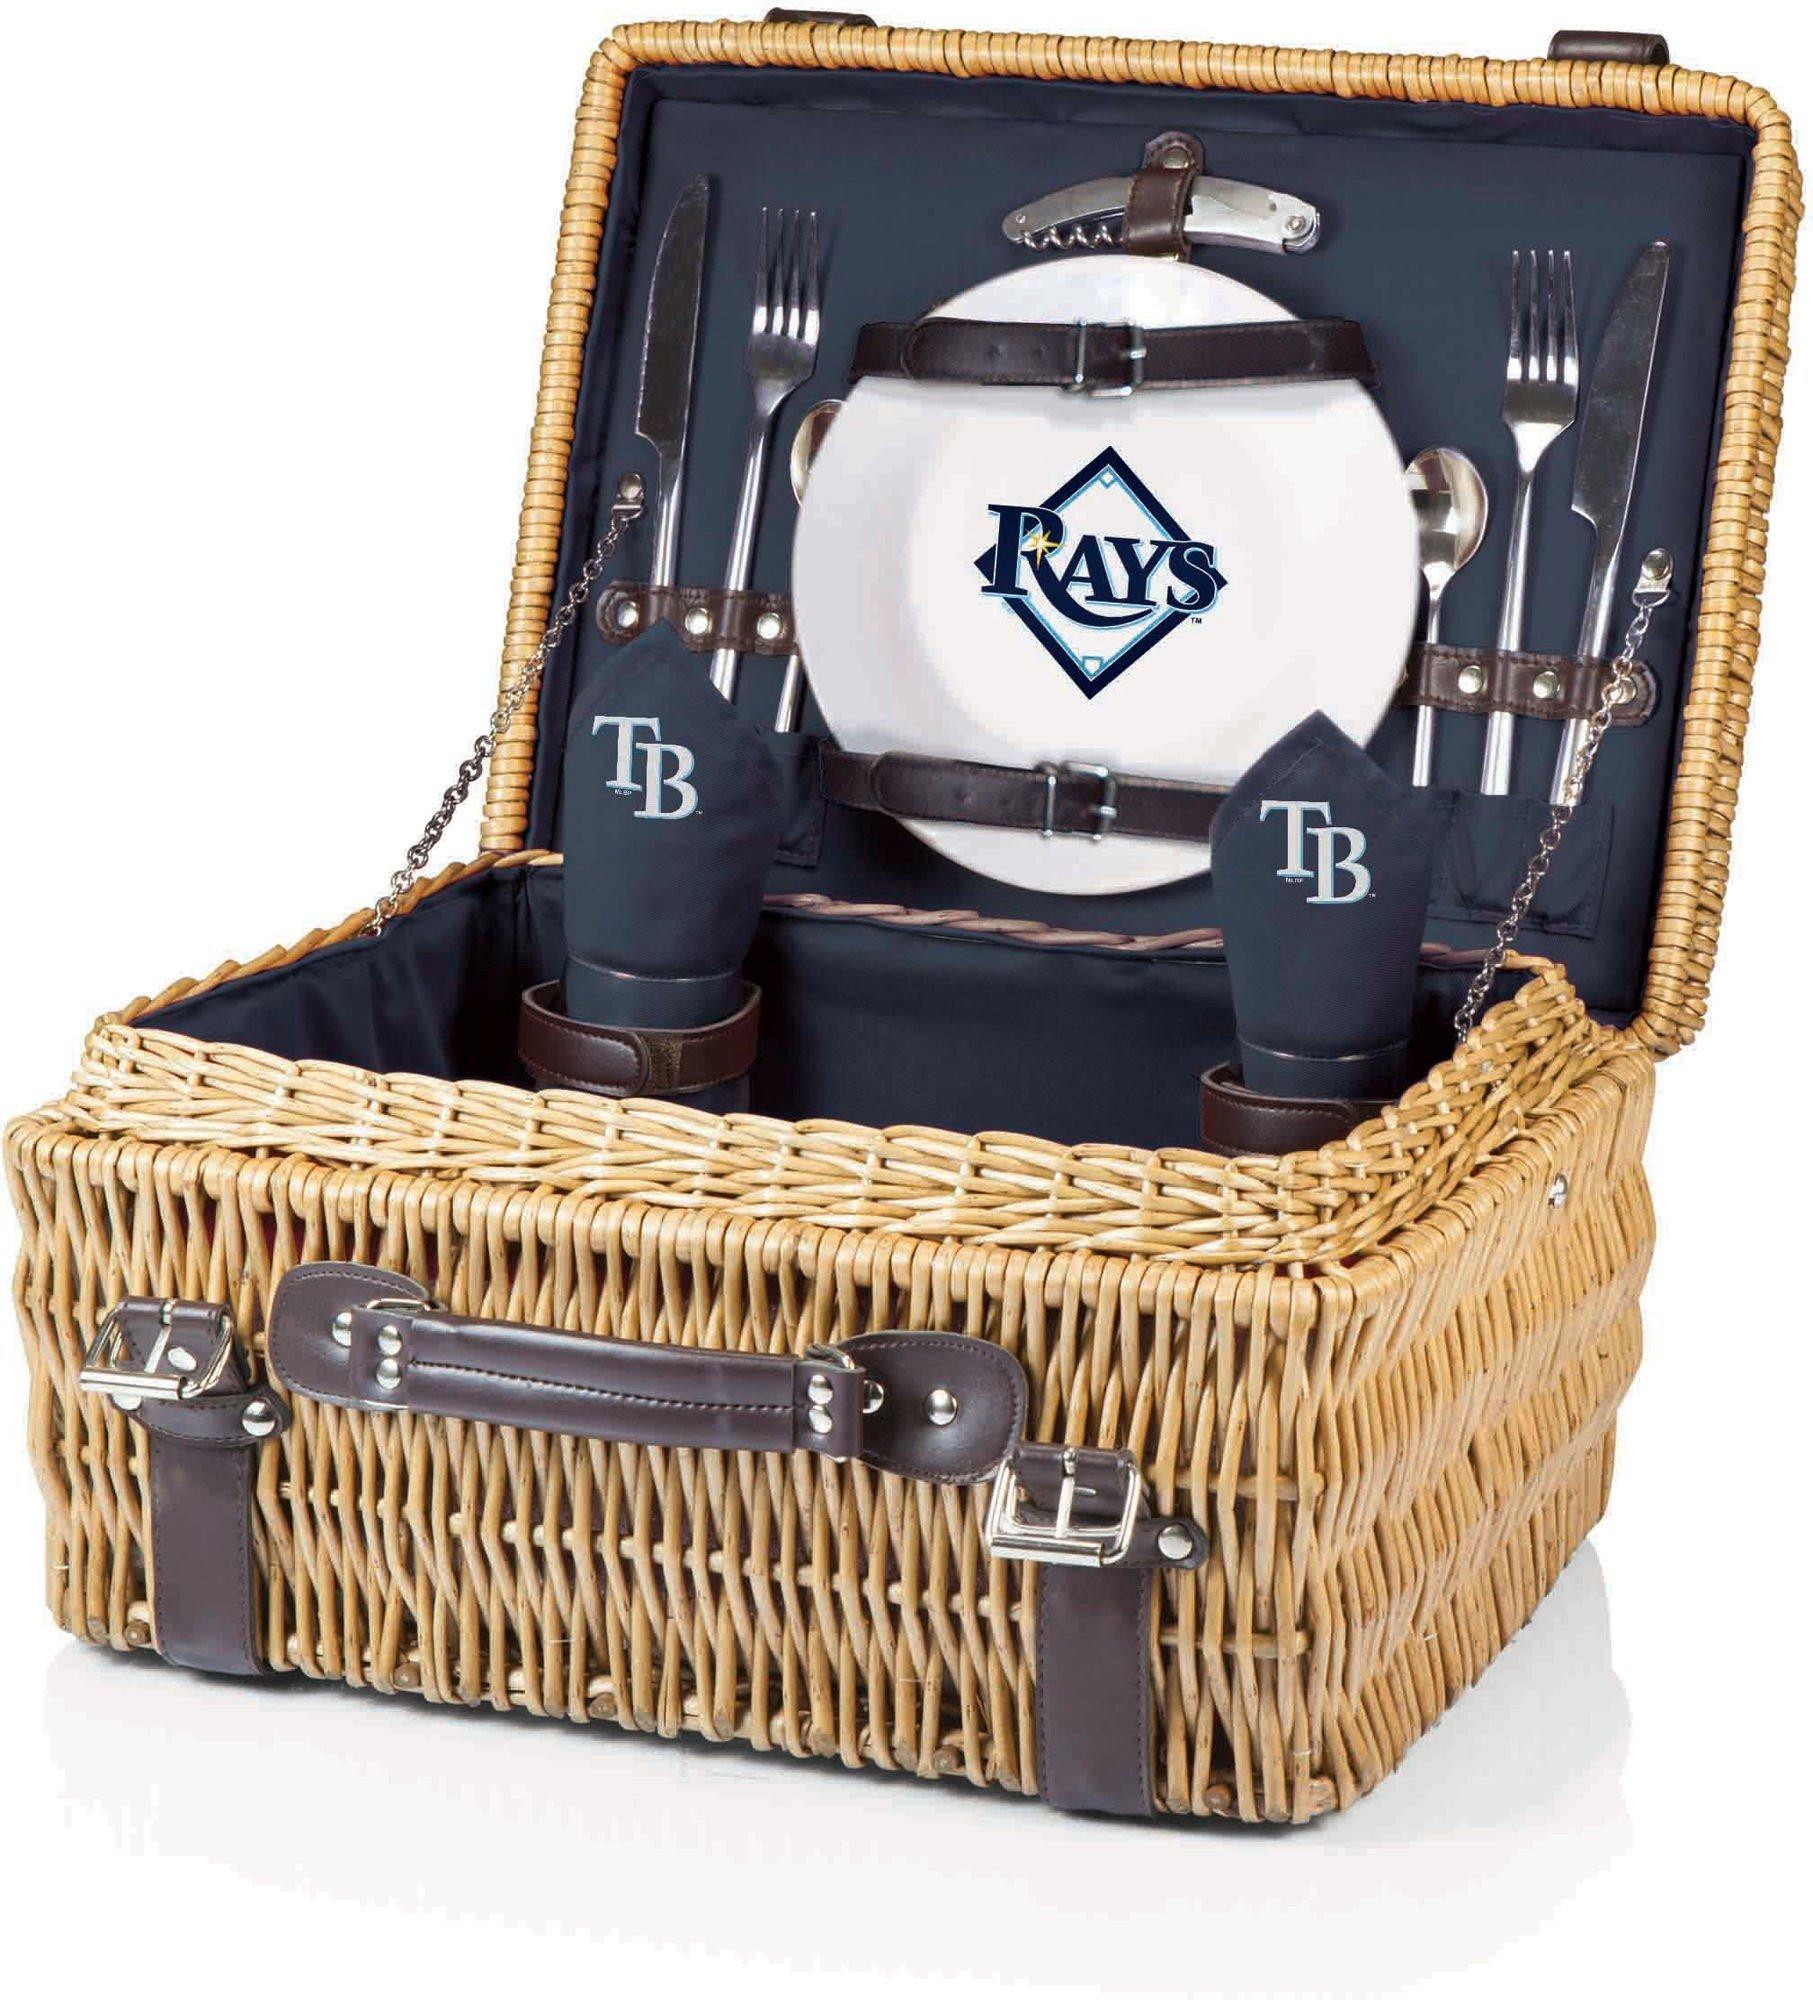 Tampa Bay Rays Picnic Basket by Picnic Time